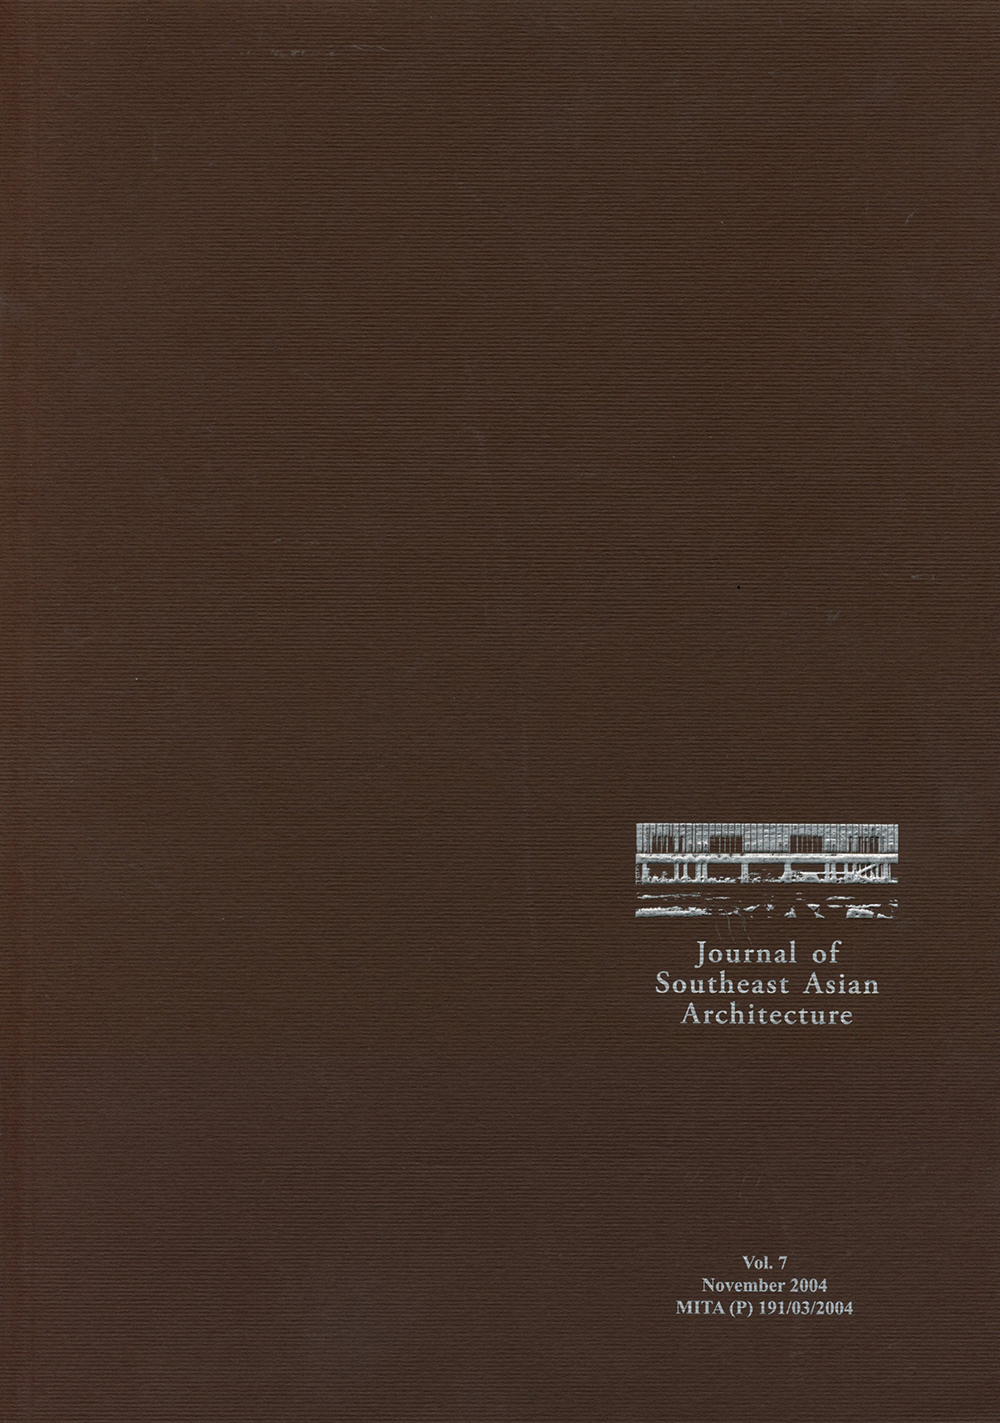 Journal of Southeast Asian Architecture (Volume 7)